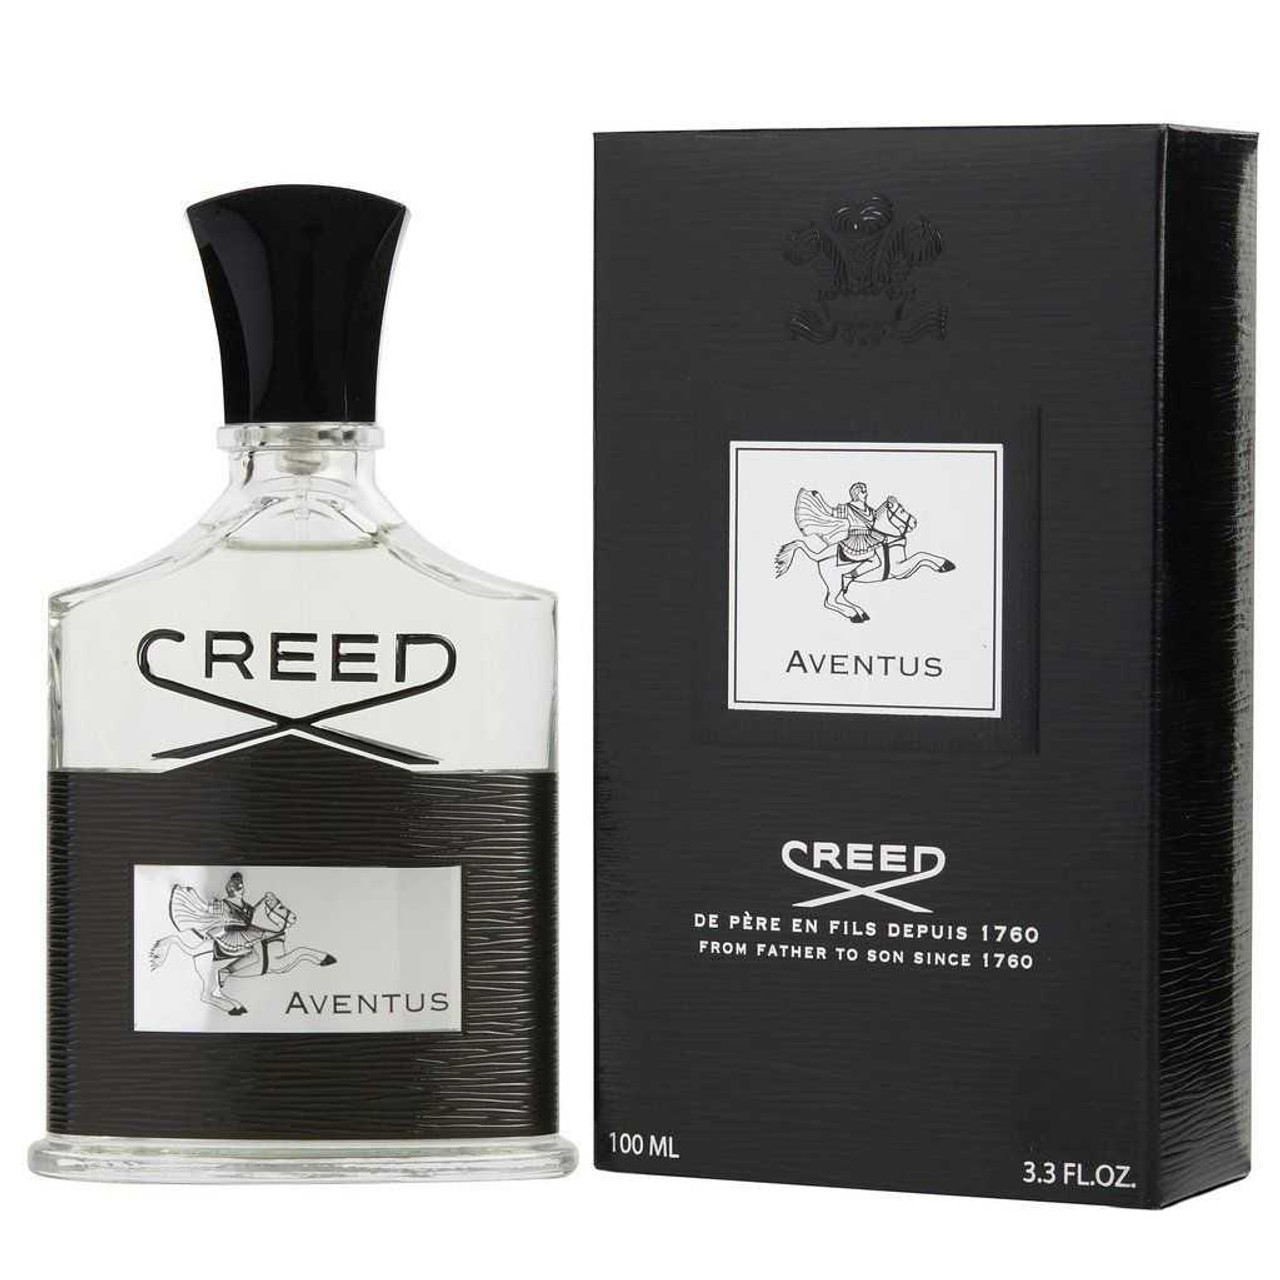 CREED Aventus - best niche perfume for men